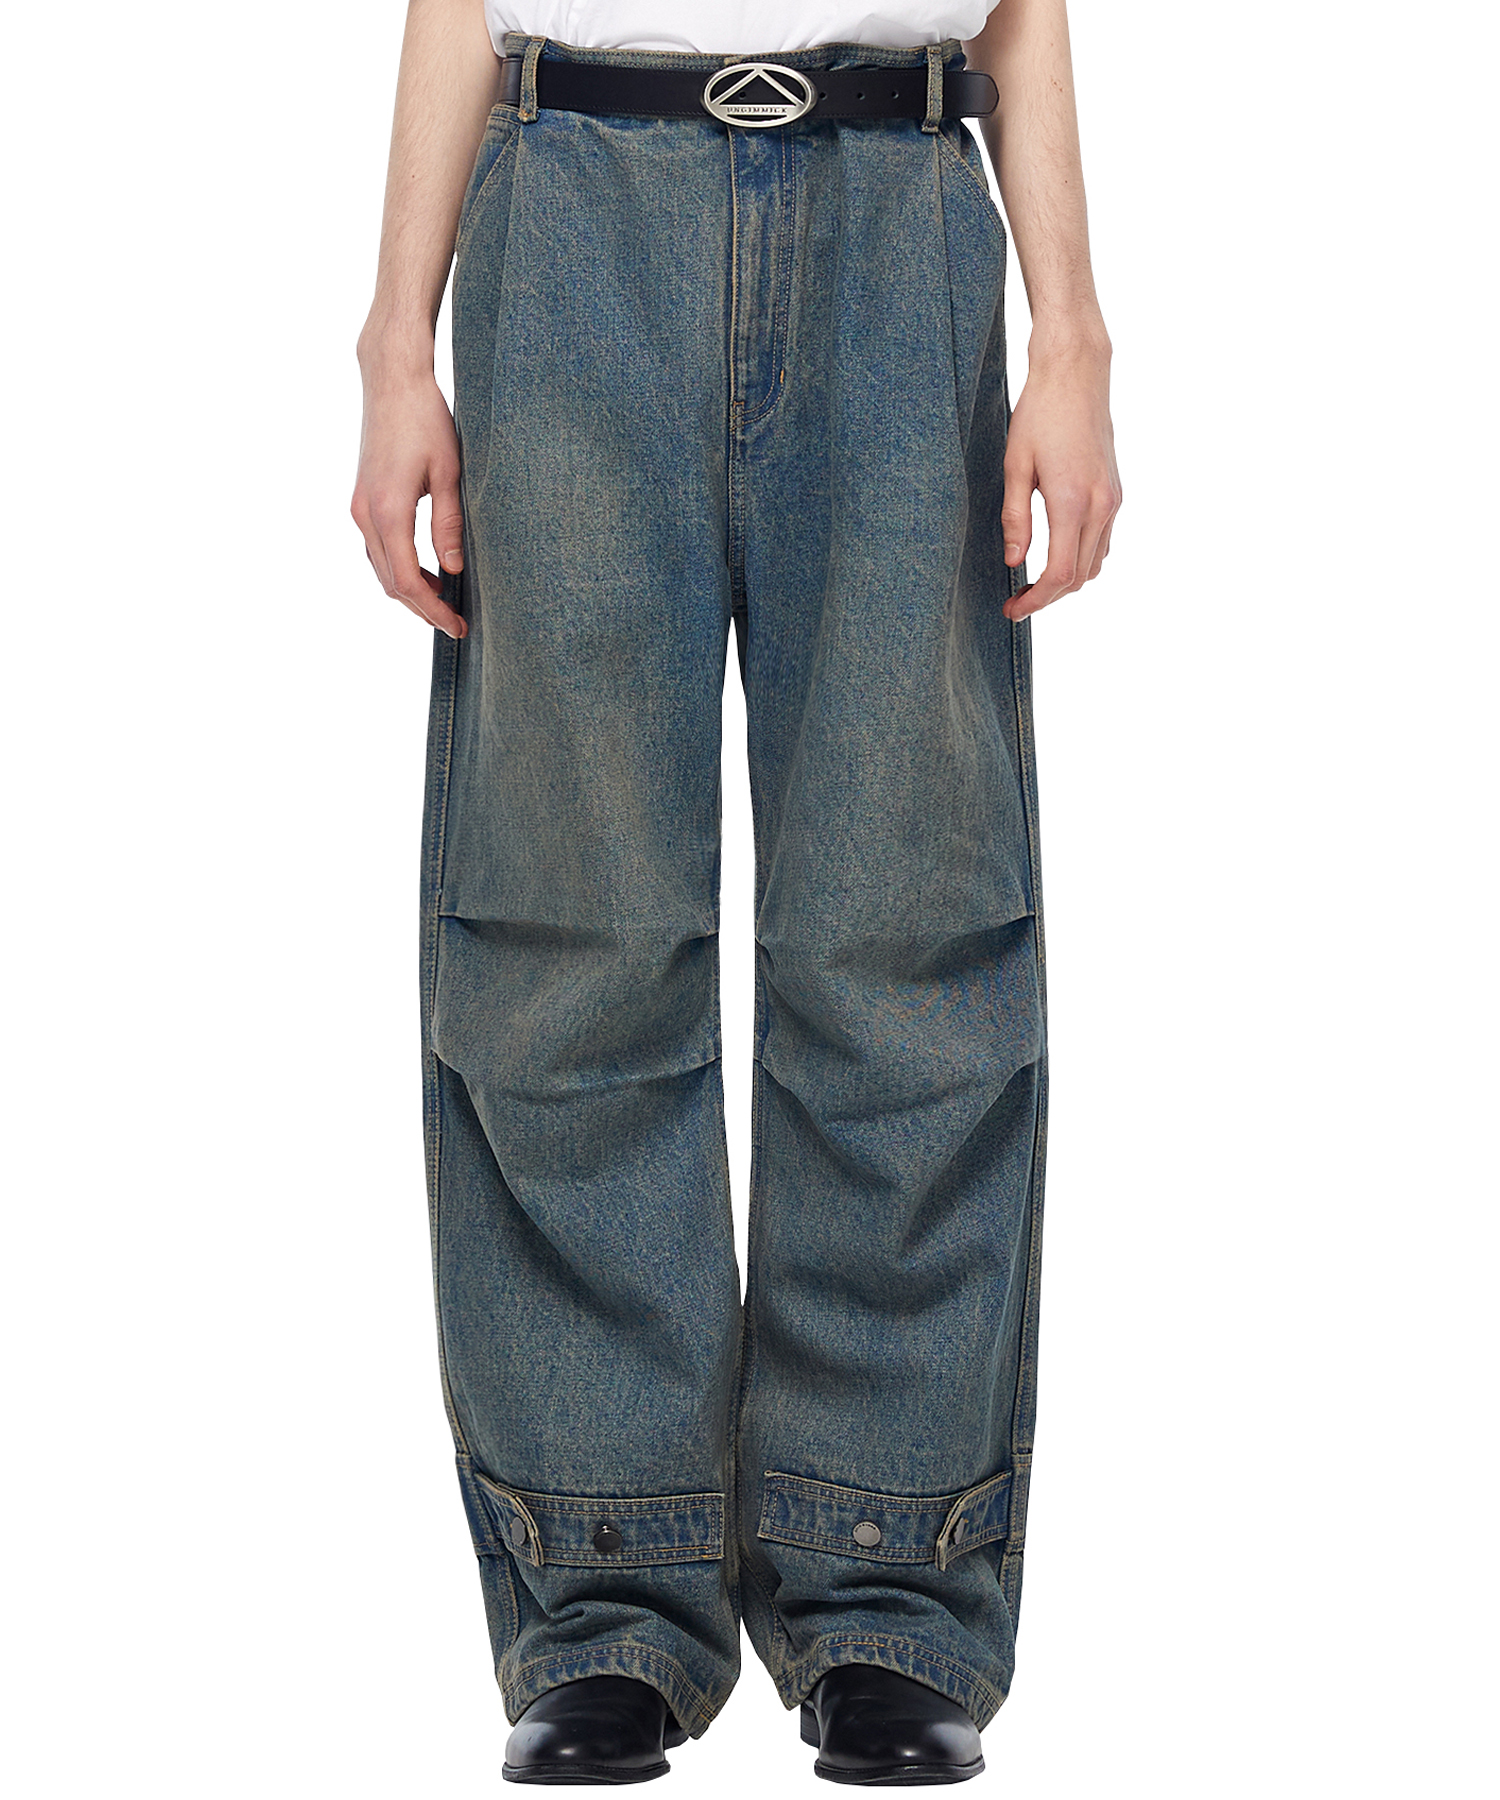 Two Tuck Washed Denim Pants - Sand Yellow